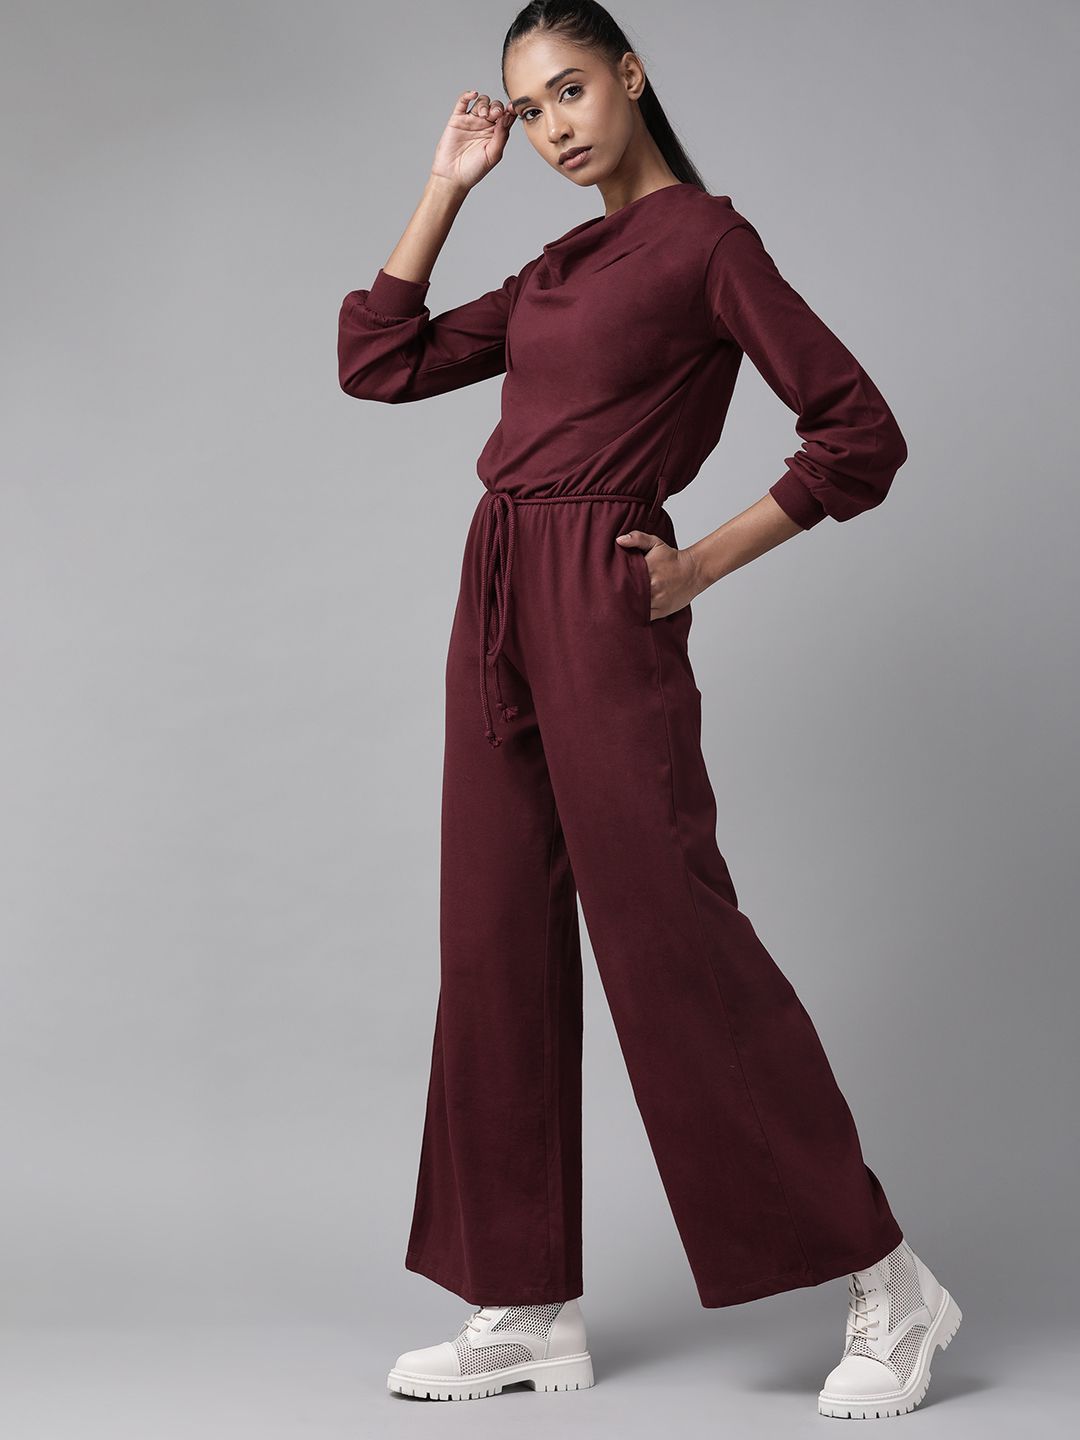 Roadster Women Burgundy Solid Cowl Neck Basic Jumpsuit with Belt Price in India